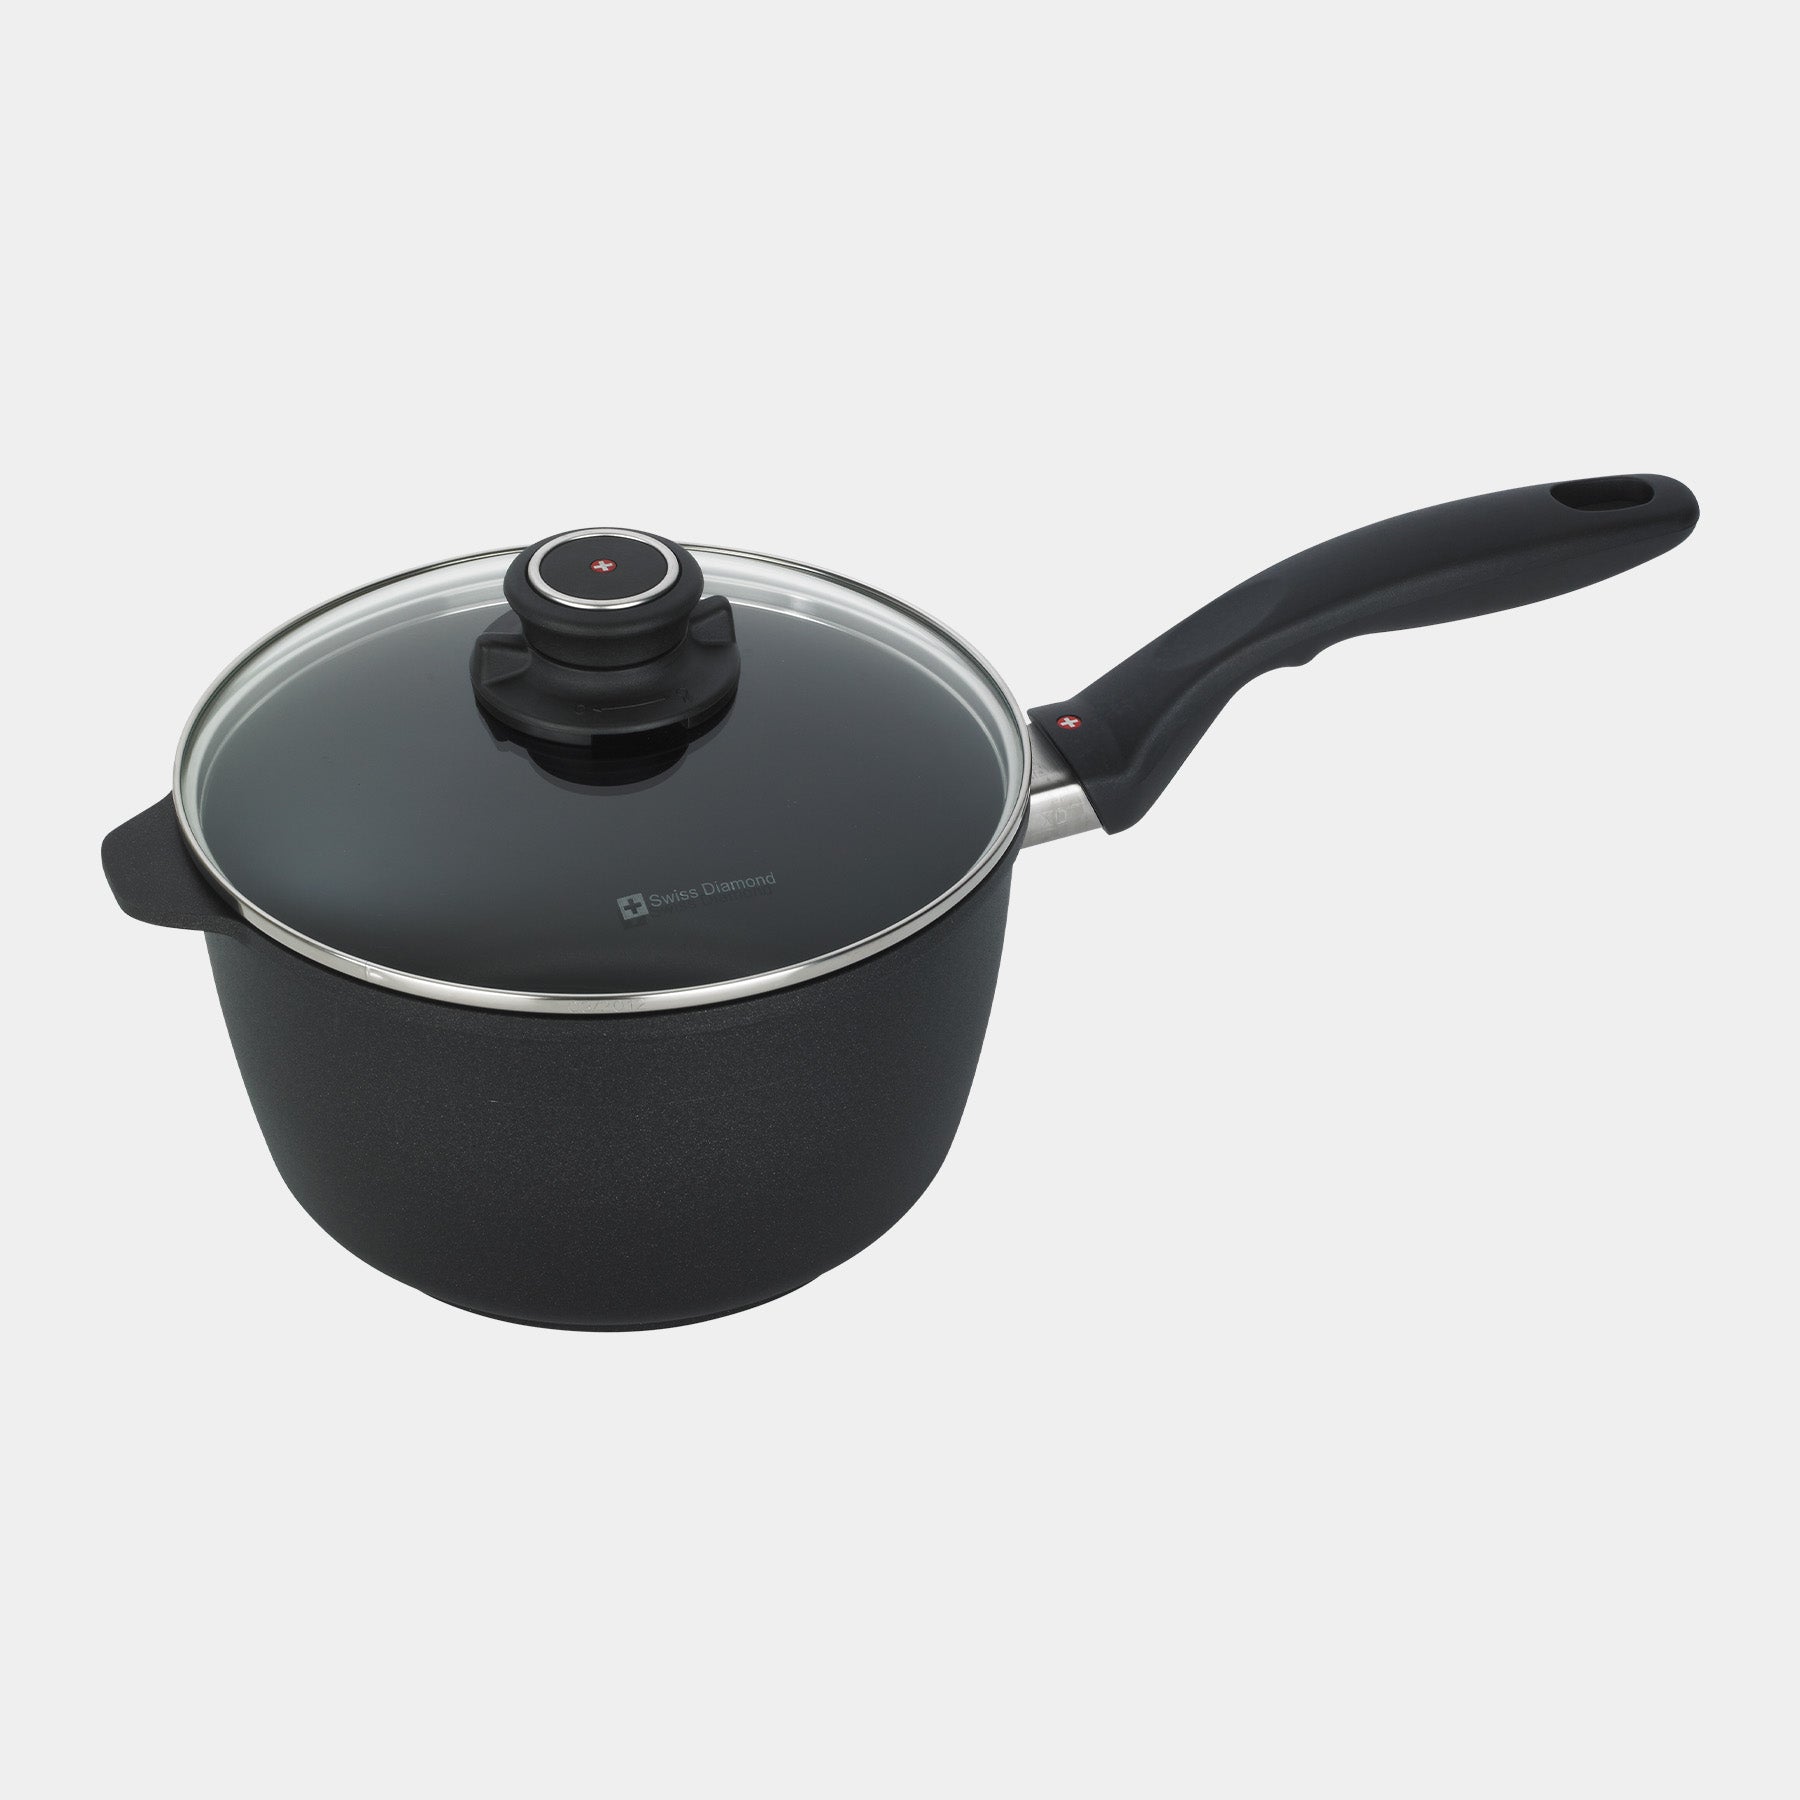 XD Nonstick 3.2 qt Saucepan with Glass Lid - Induction